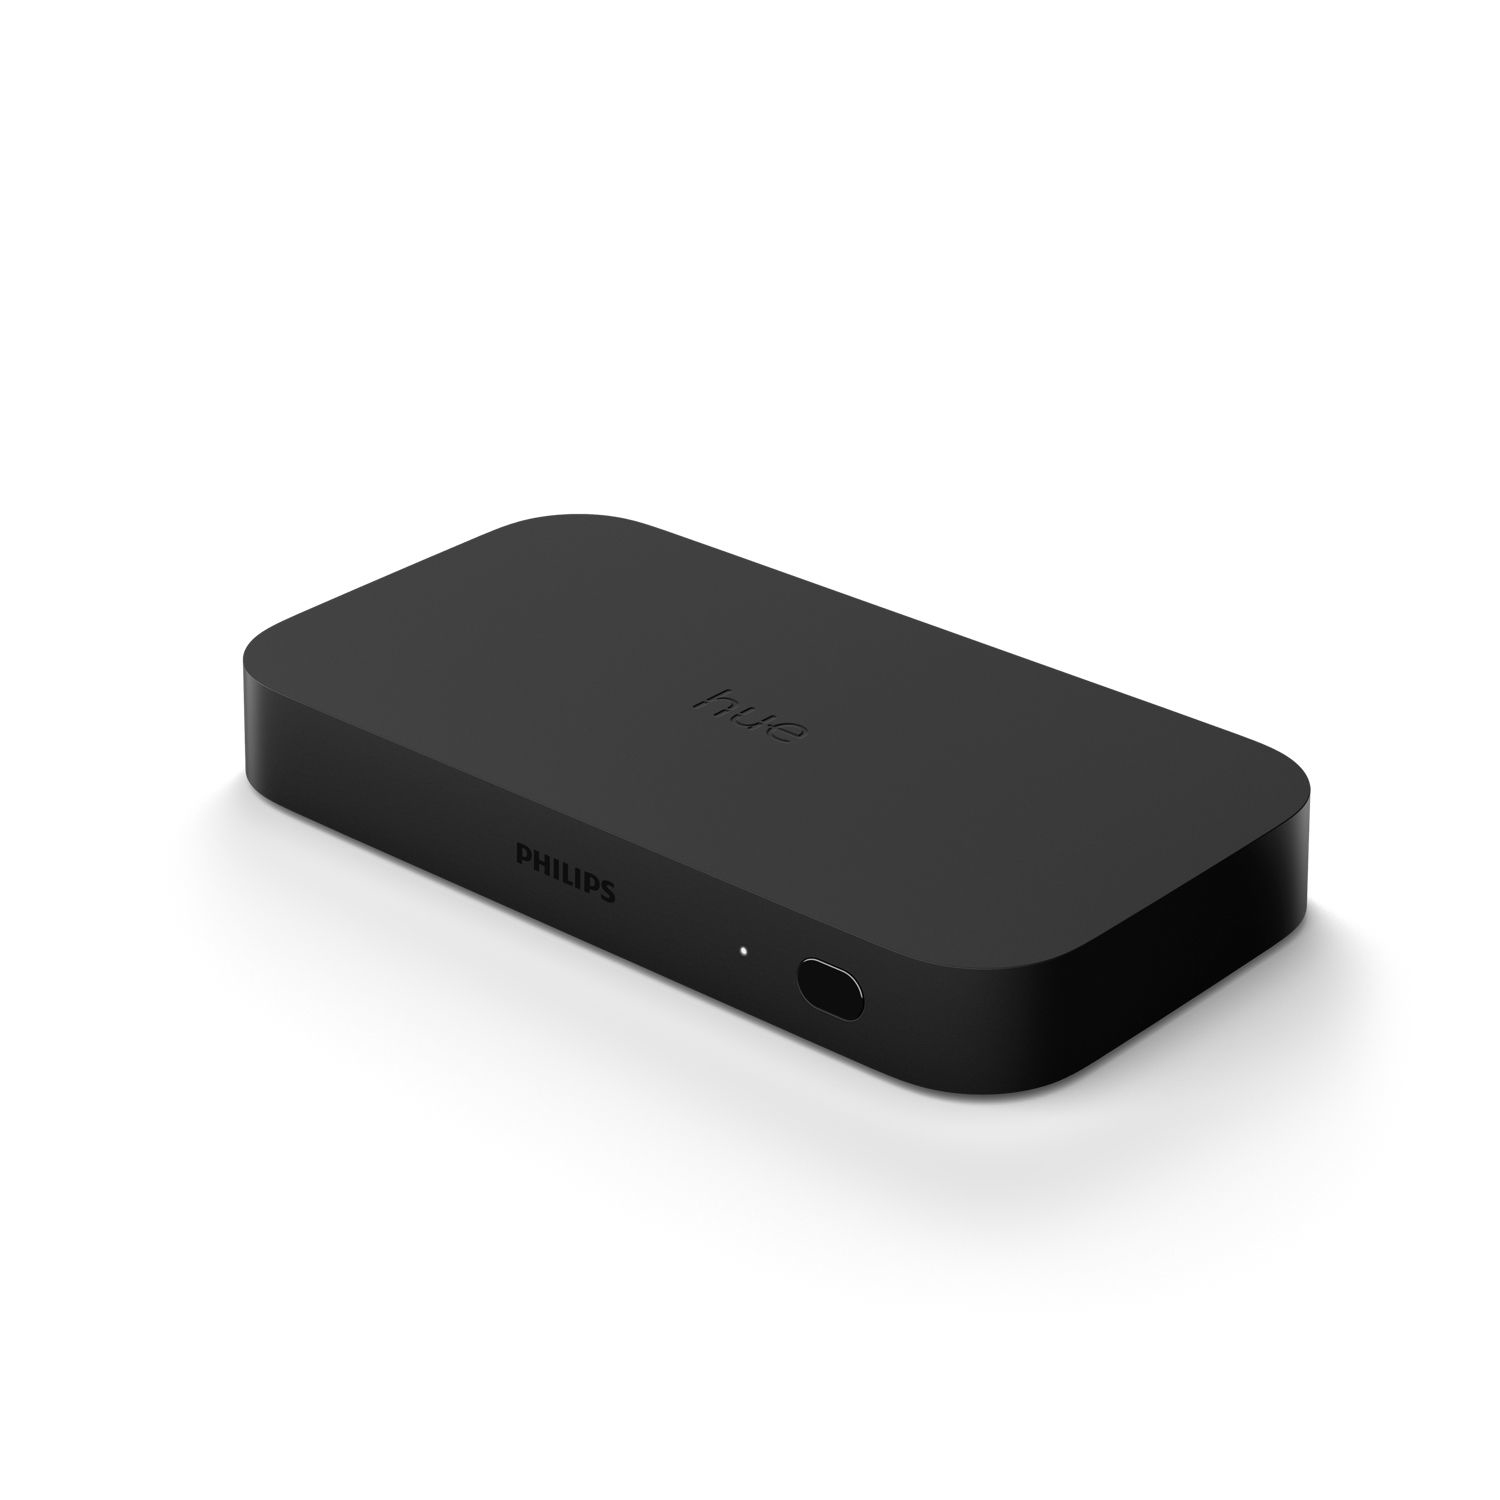 Philips by Signify Play HDMI sync box